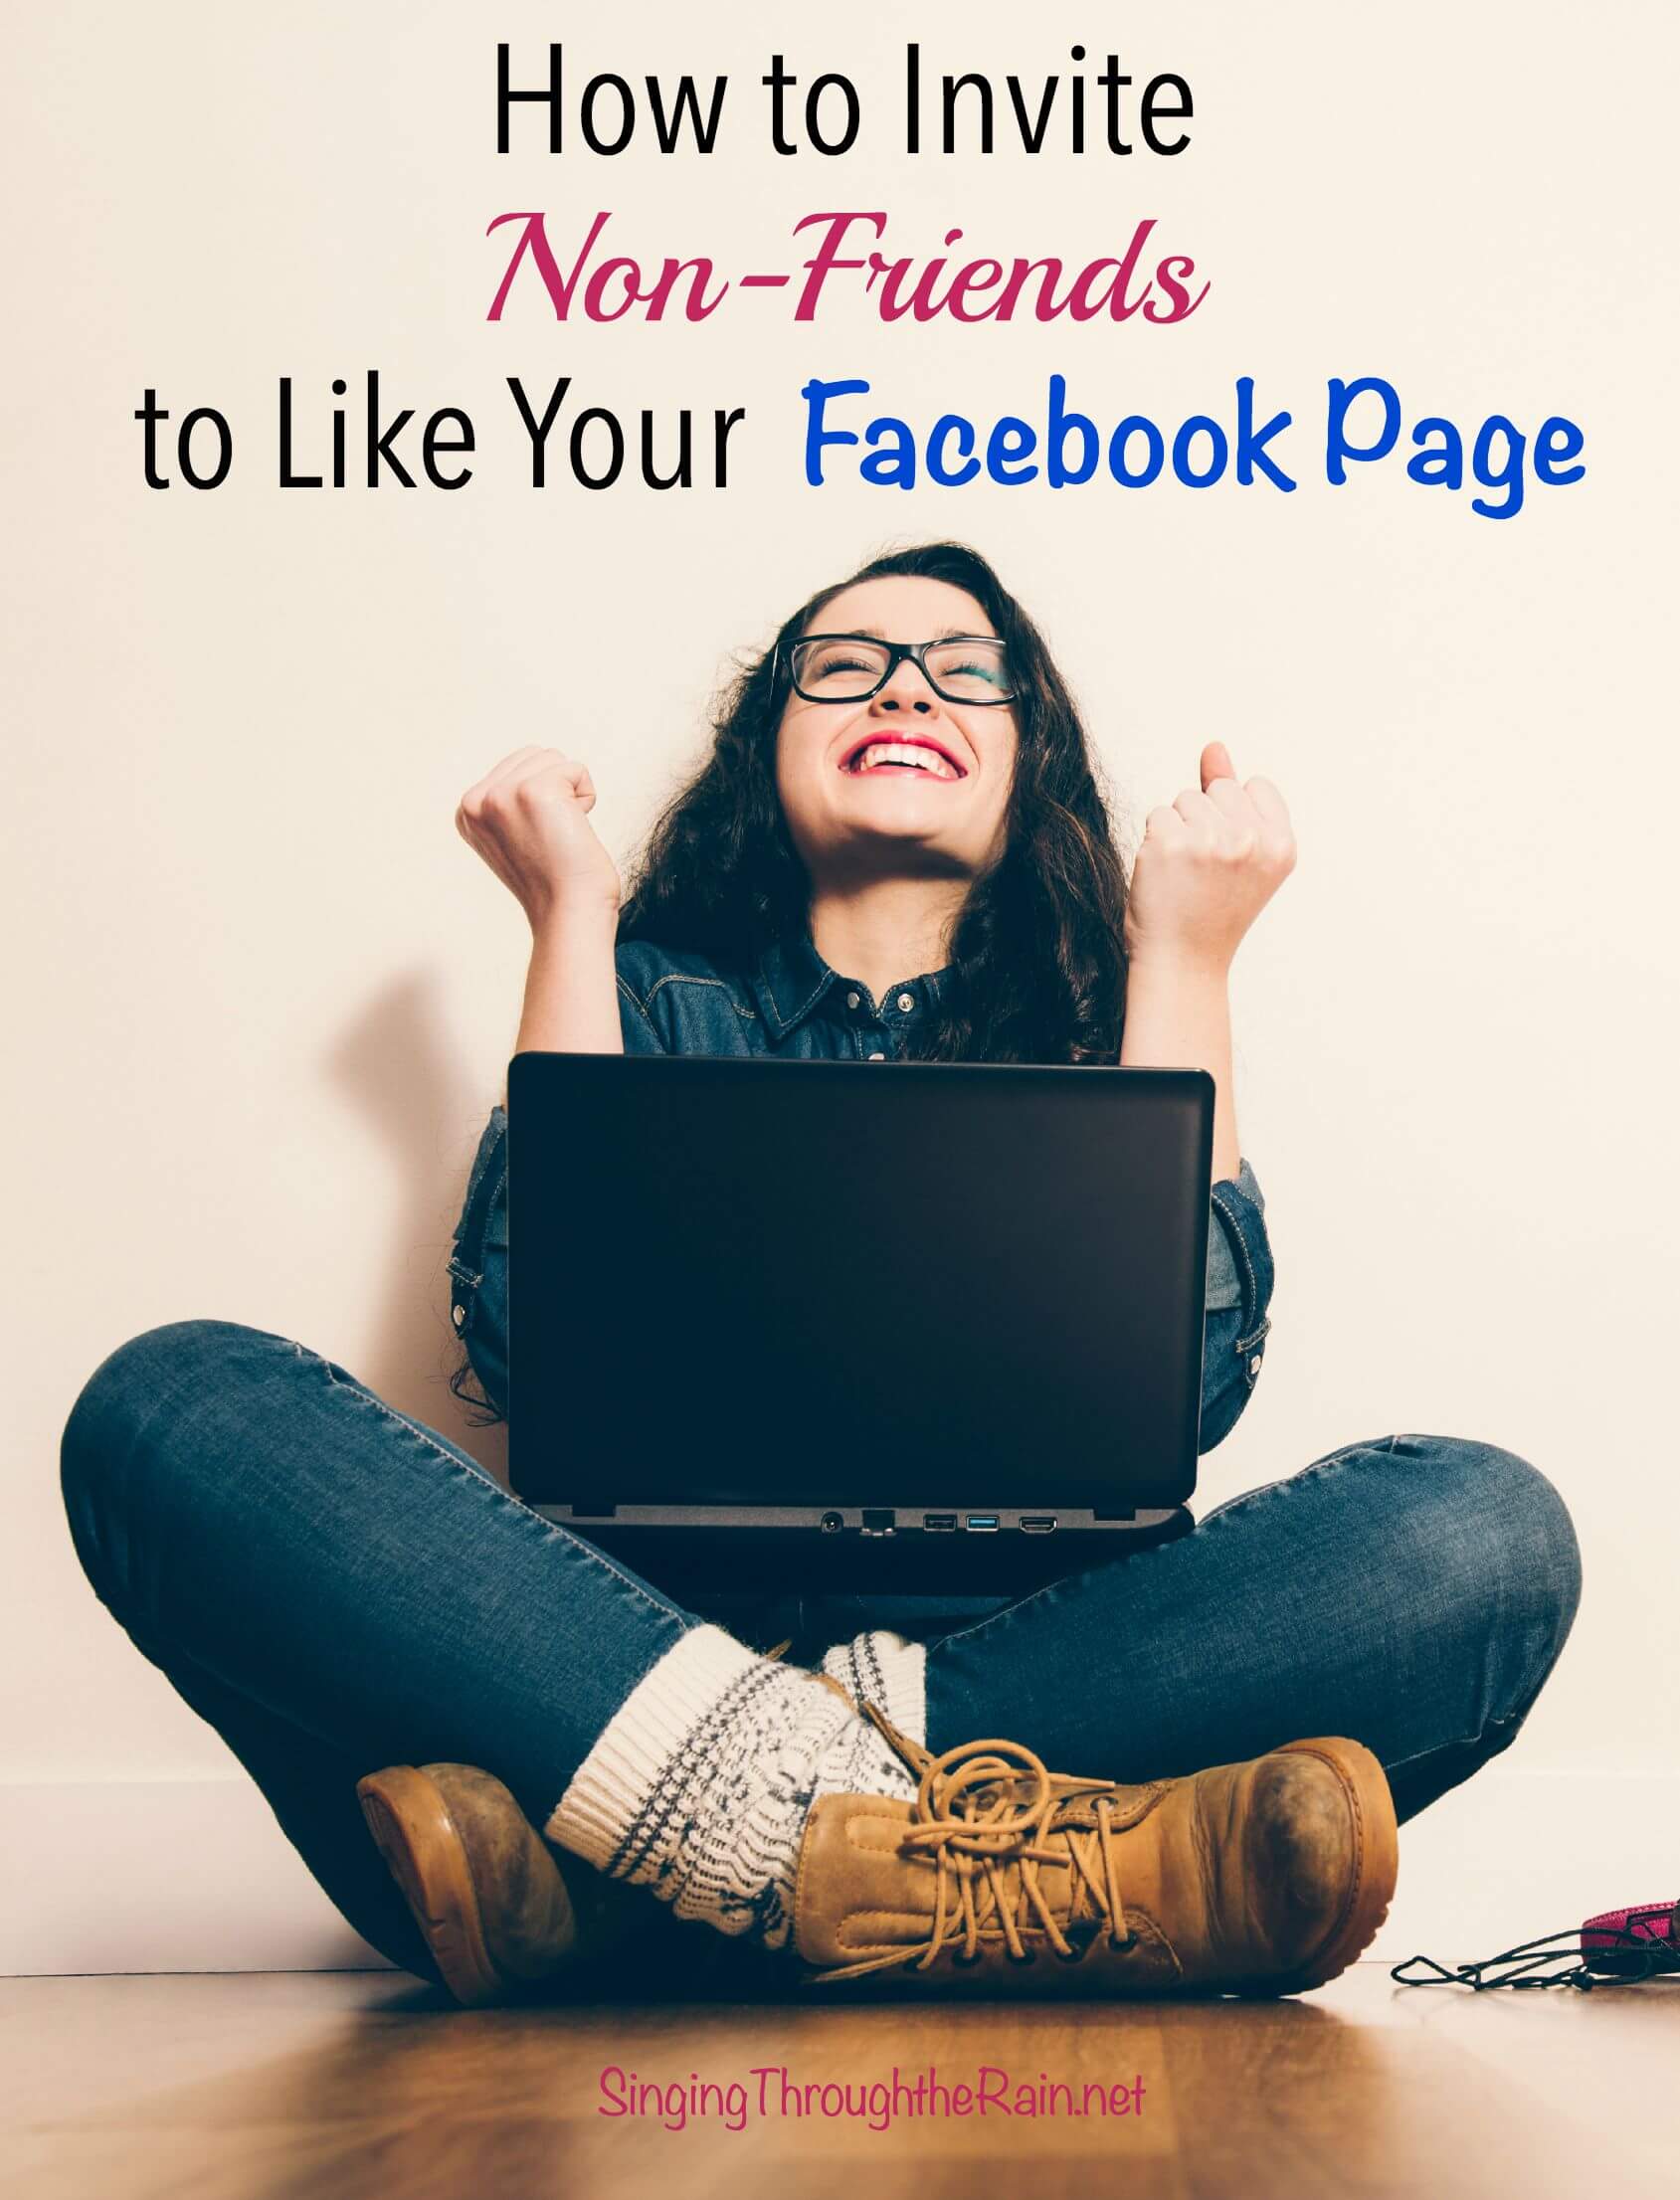 How to Invite Non-Friends to Like Your Facebook Page